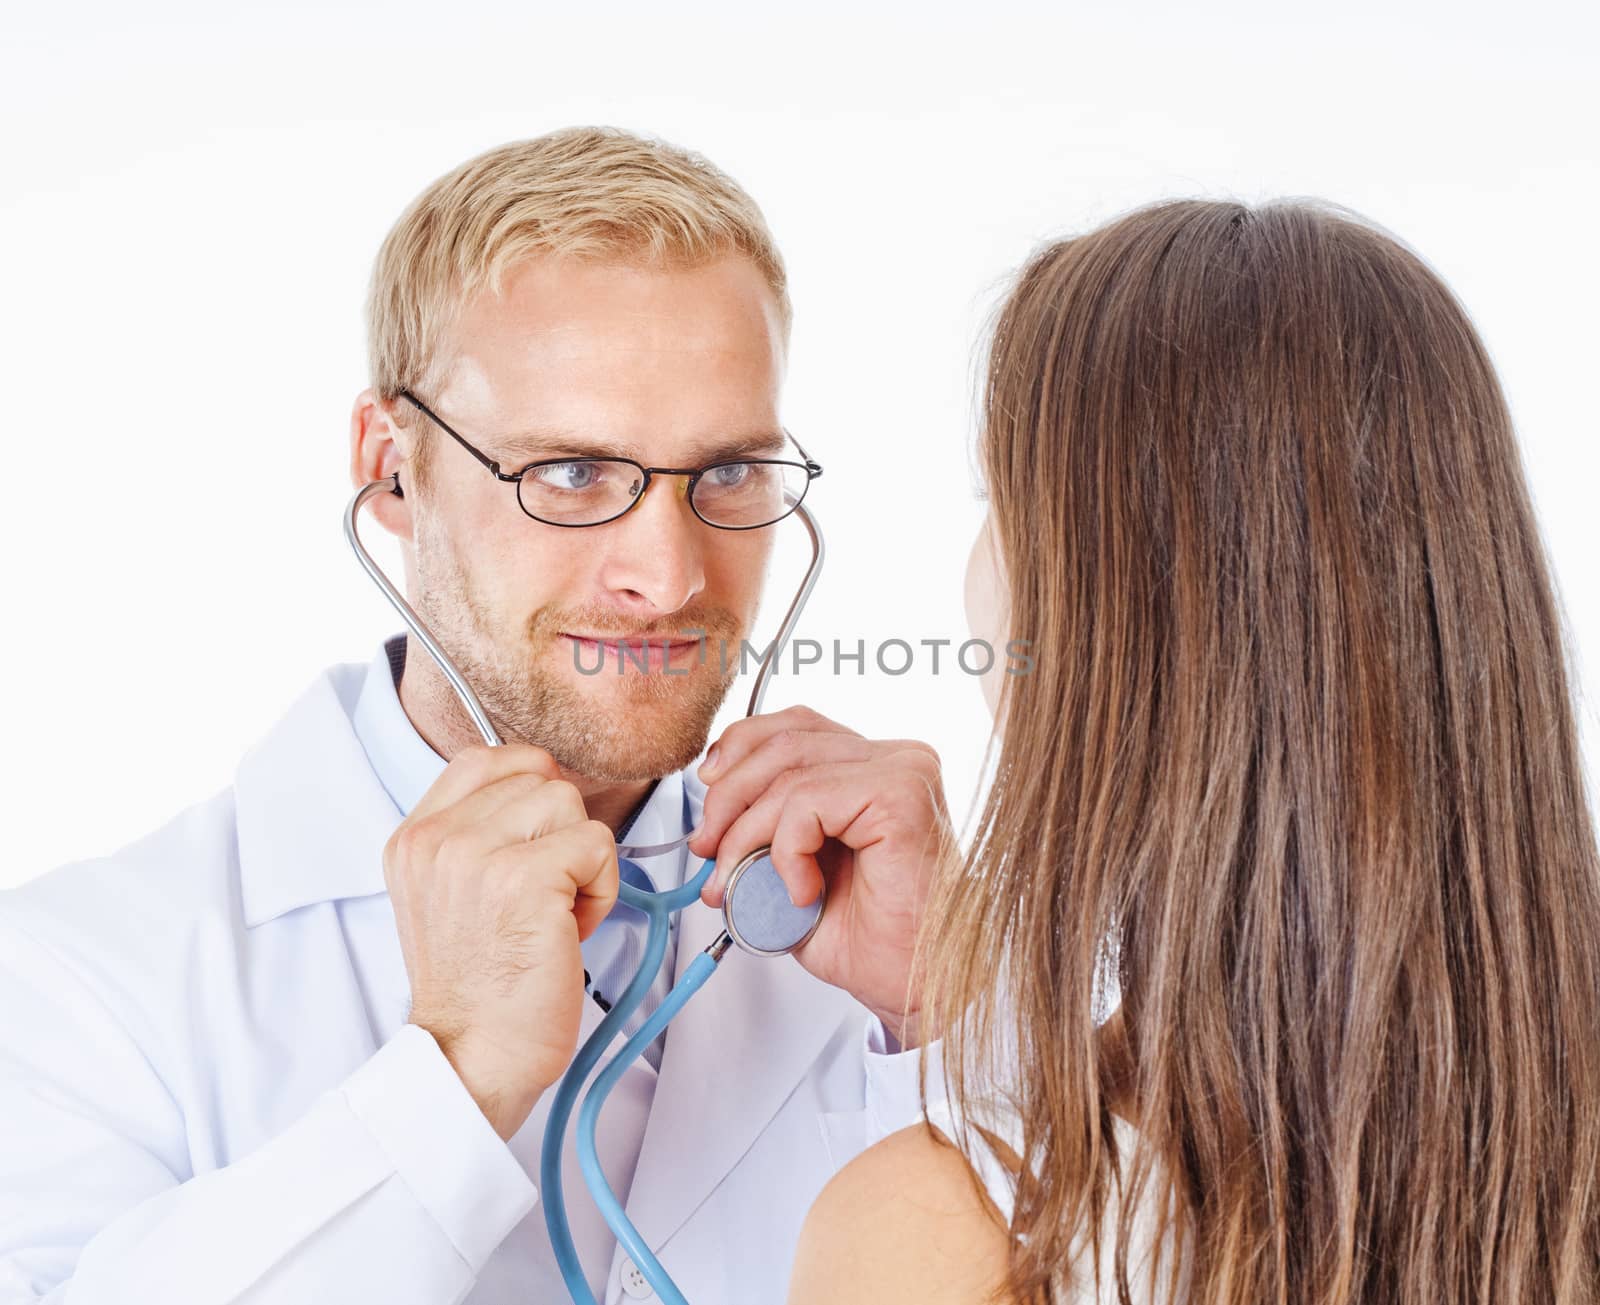 Doctor with Stethoscope and Glasses Examining Patient by courtyardpix